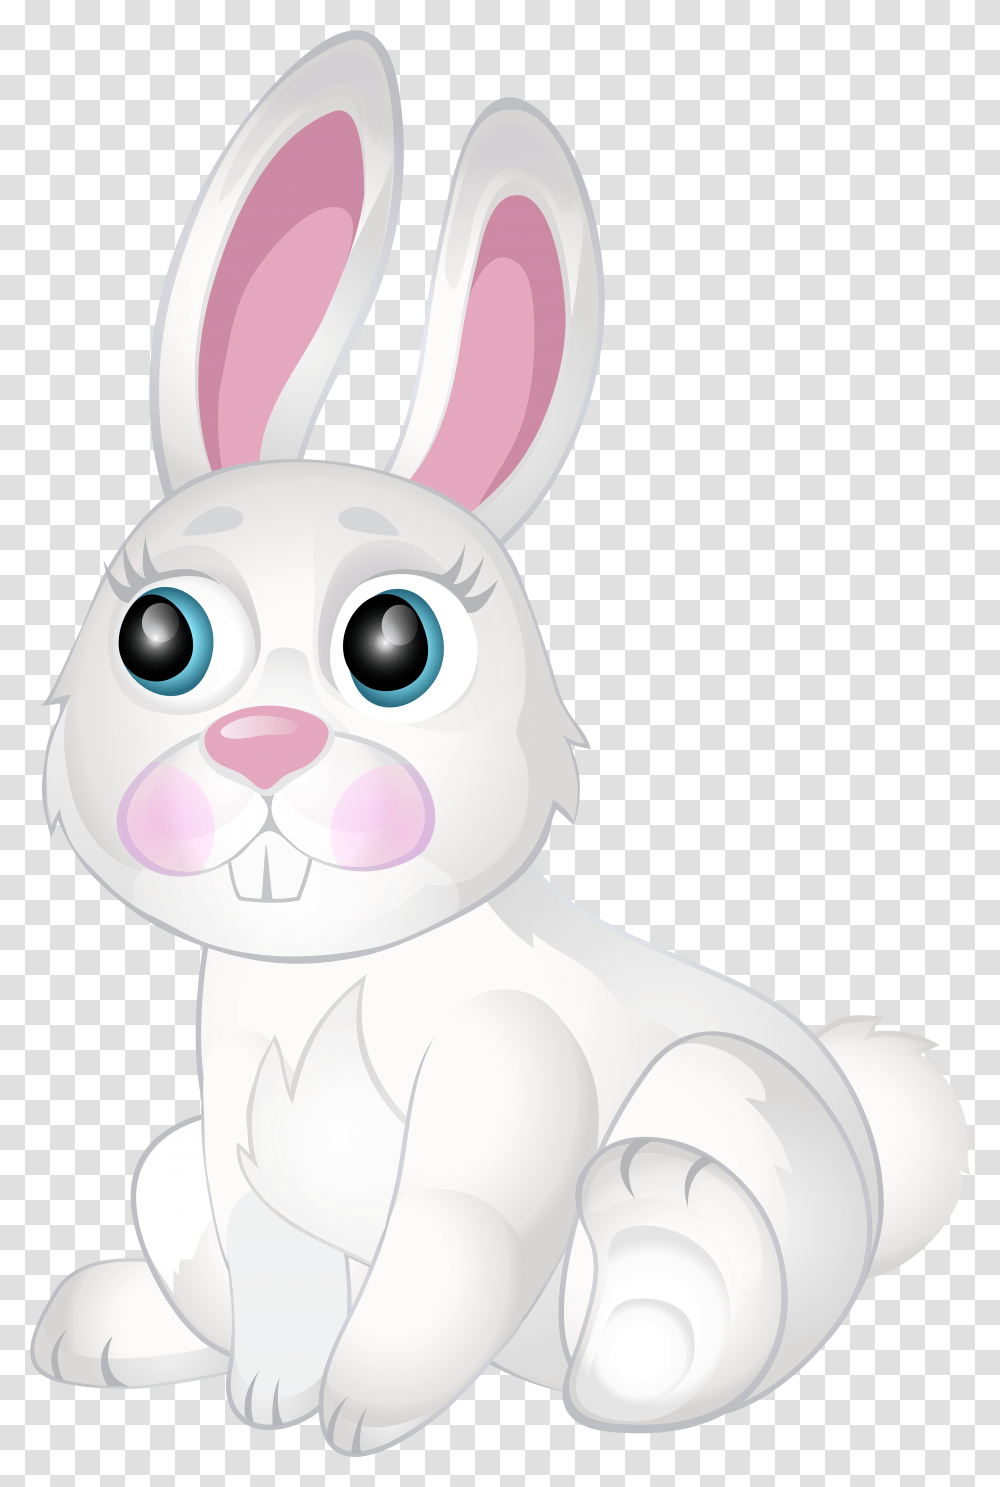 White Bunny Clip Art Image Gallery White White Bunny Cartoon, Snowman, Outdoors, Nature, Animal Transparent Png